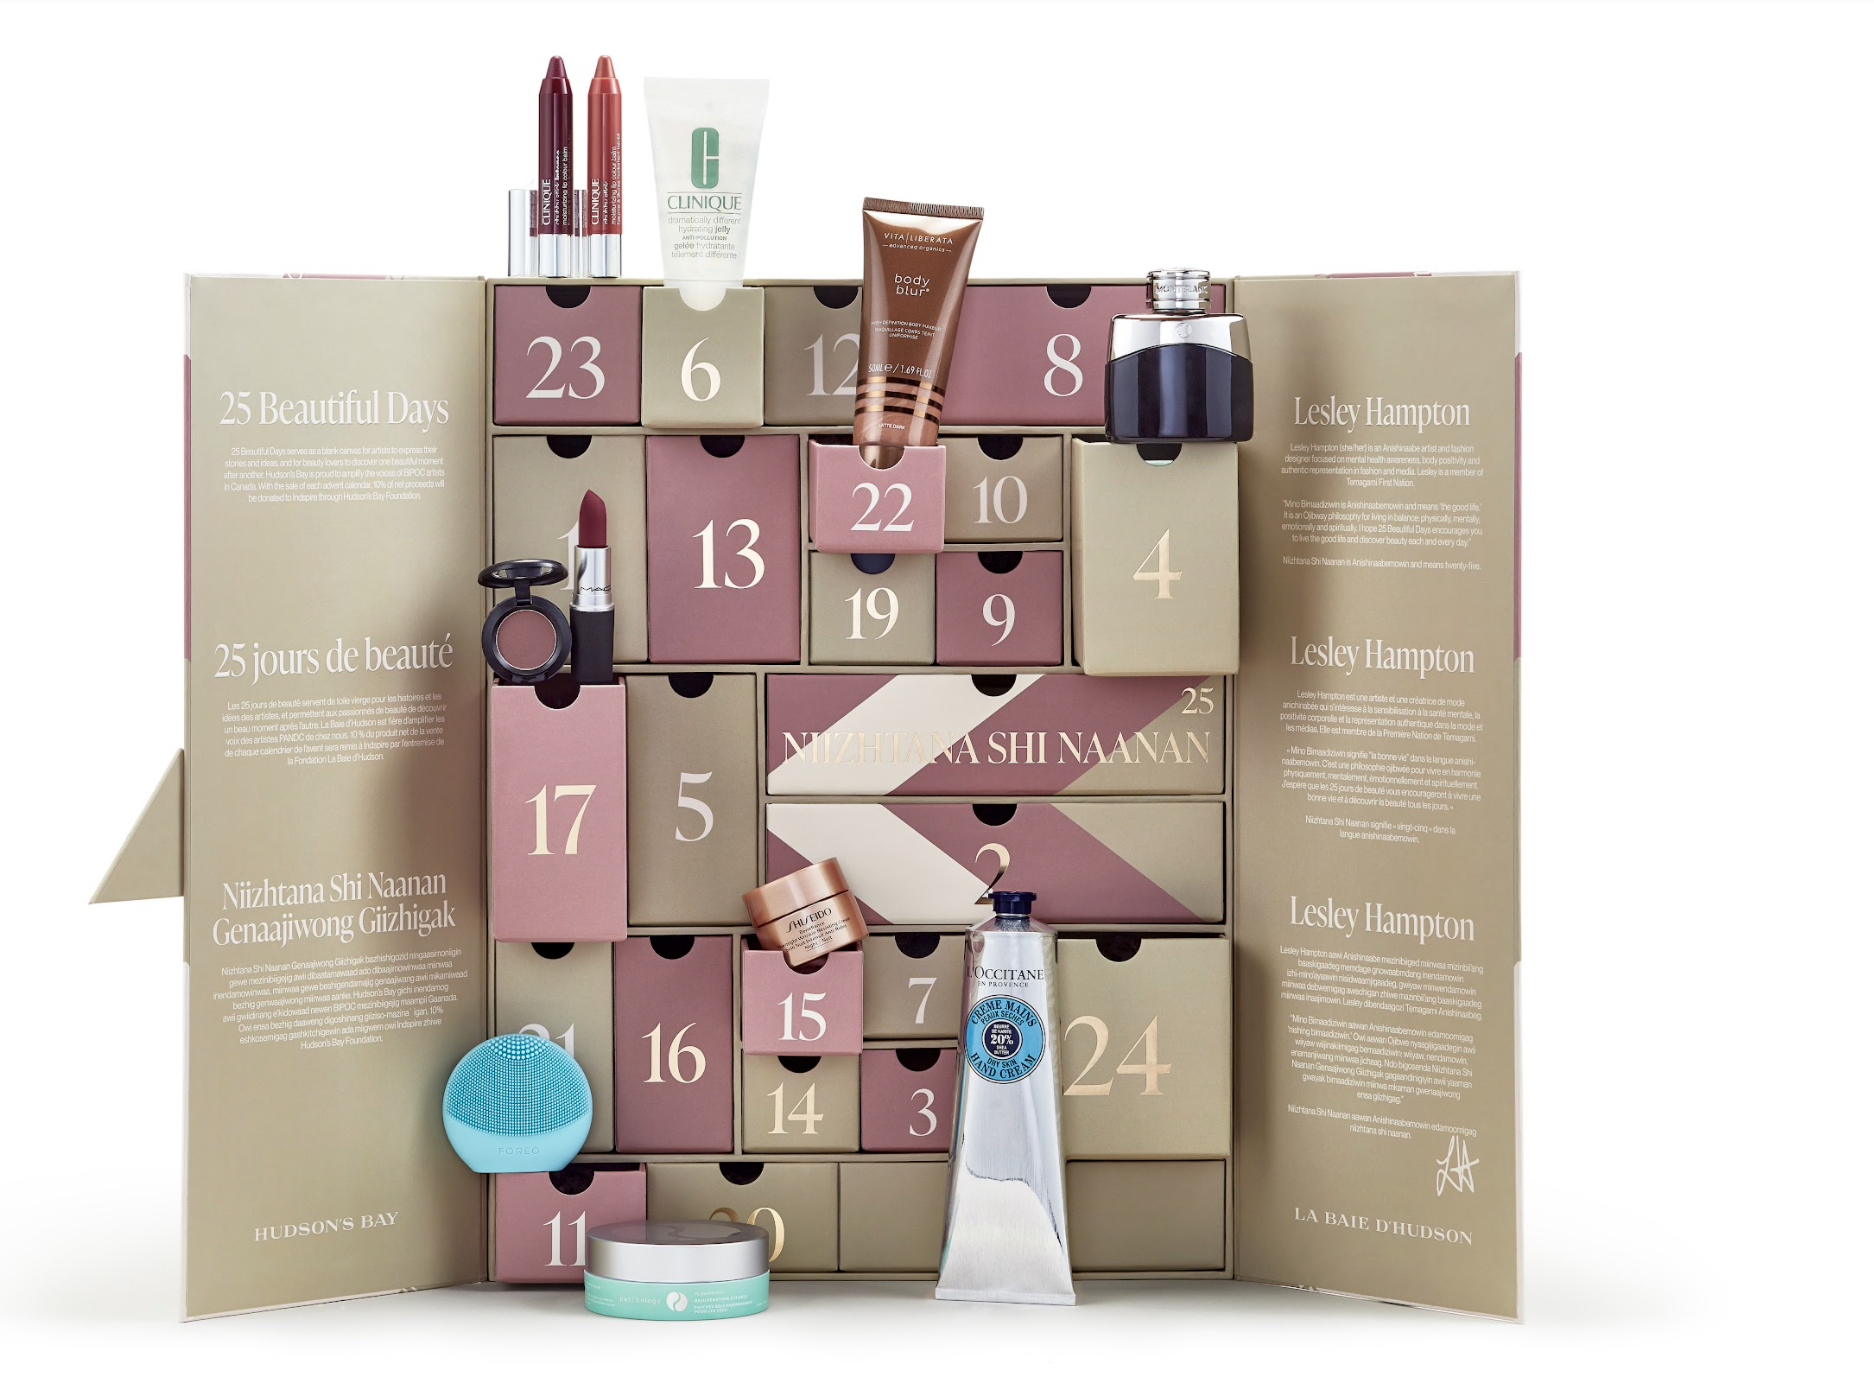 Hudson’s Bay Launches Holiday Advent Calendar with Lesley Hampton